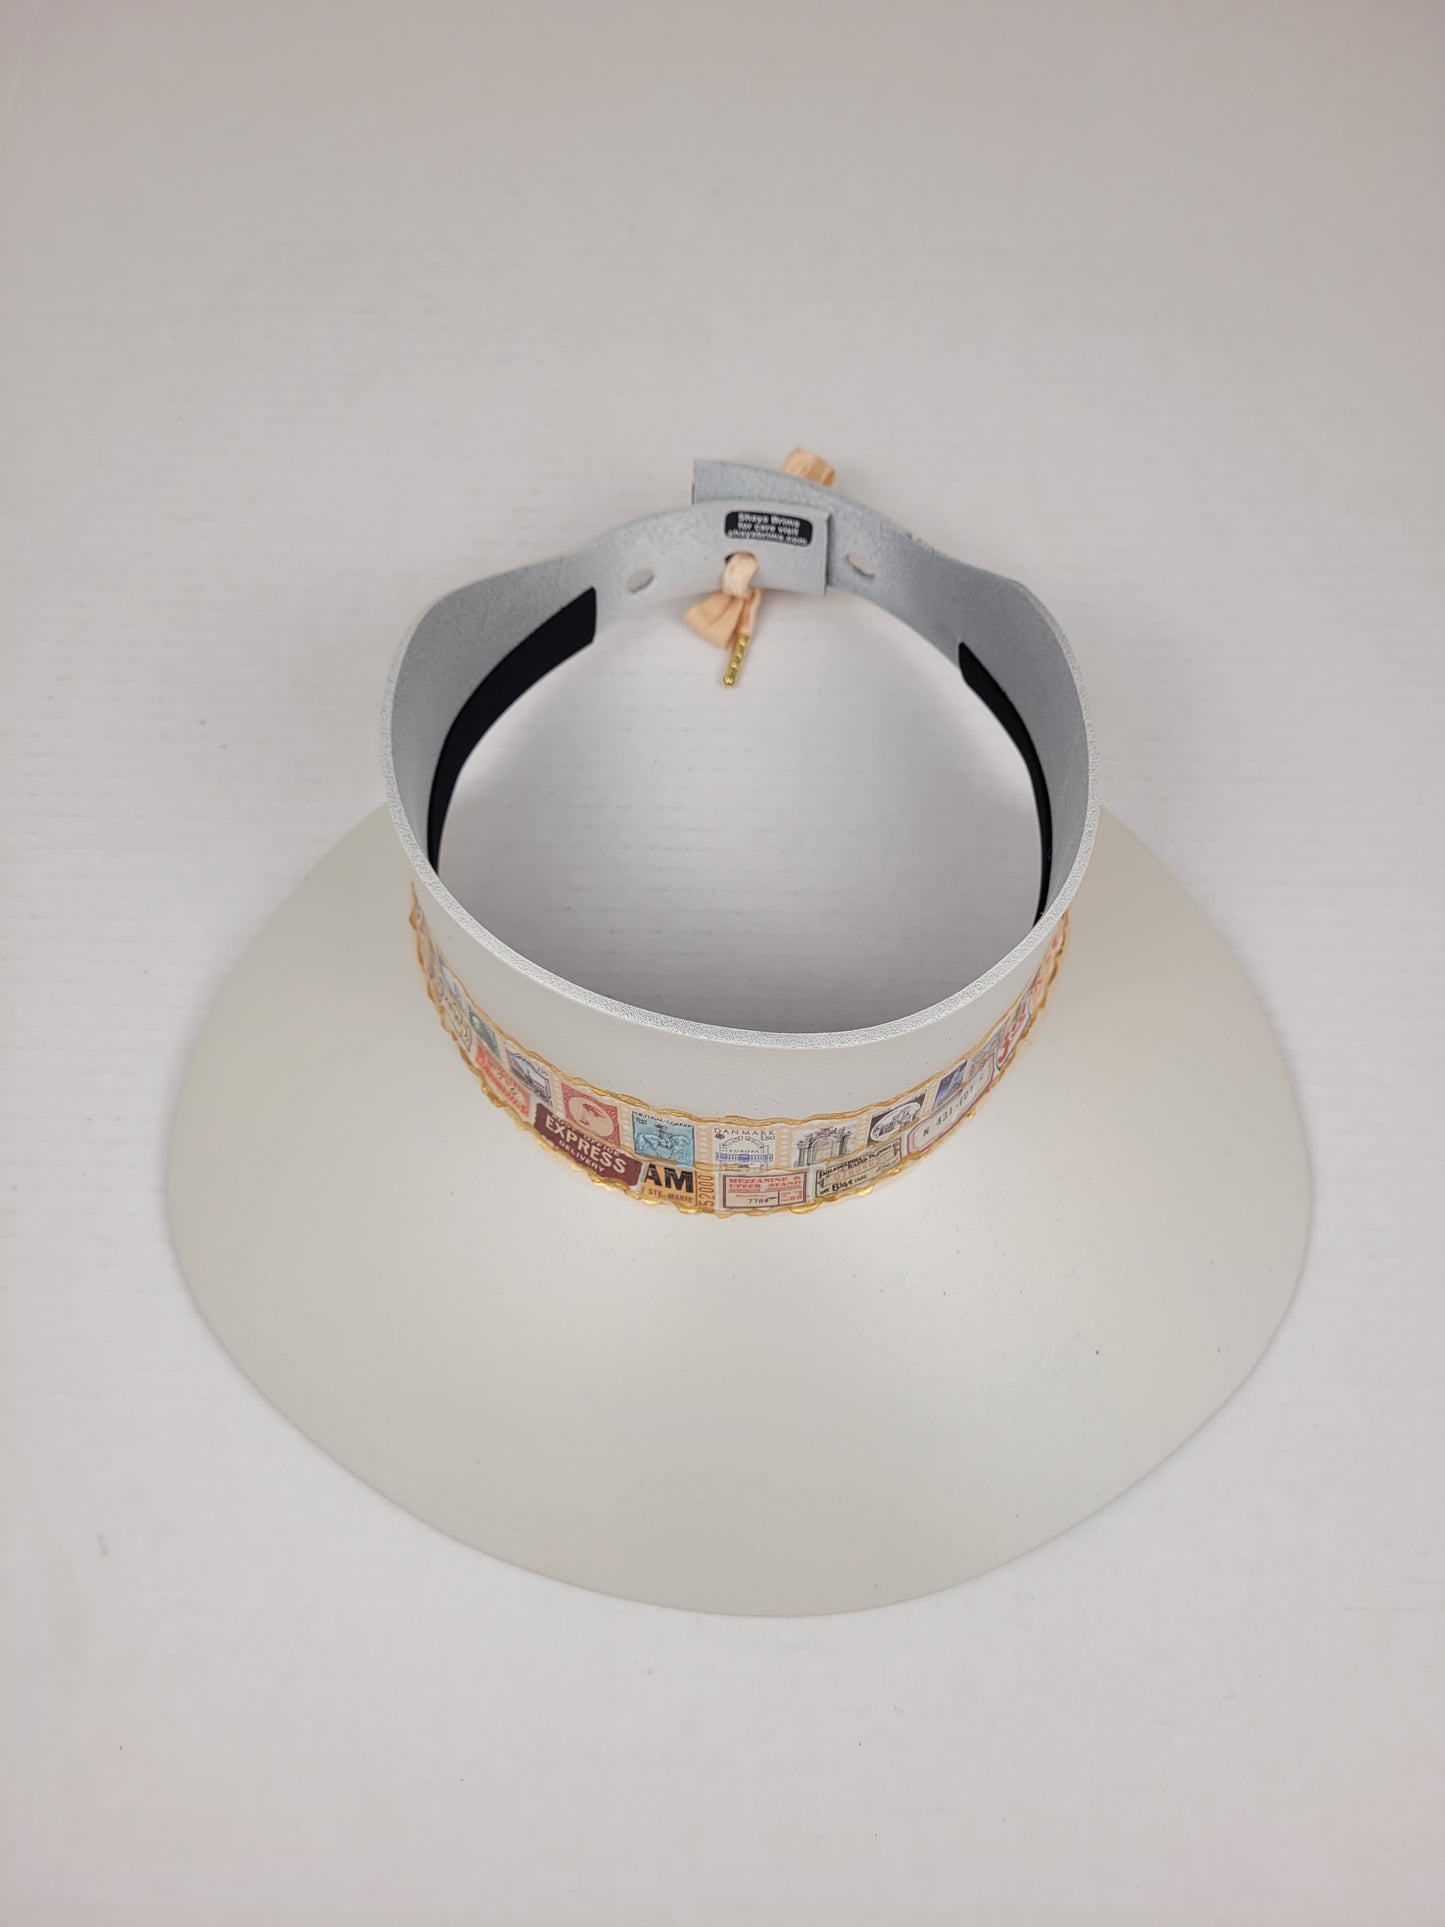 Audrey Wide Brim Visor Hat - Cream with Stamp Themed Band